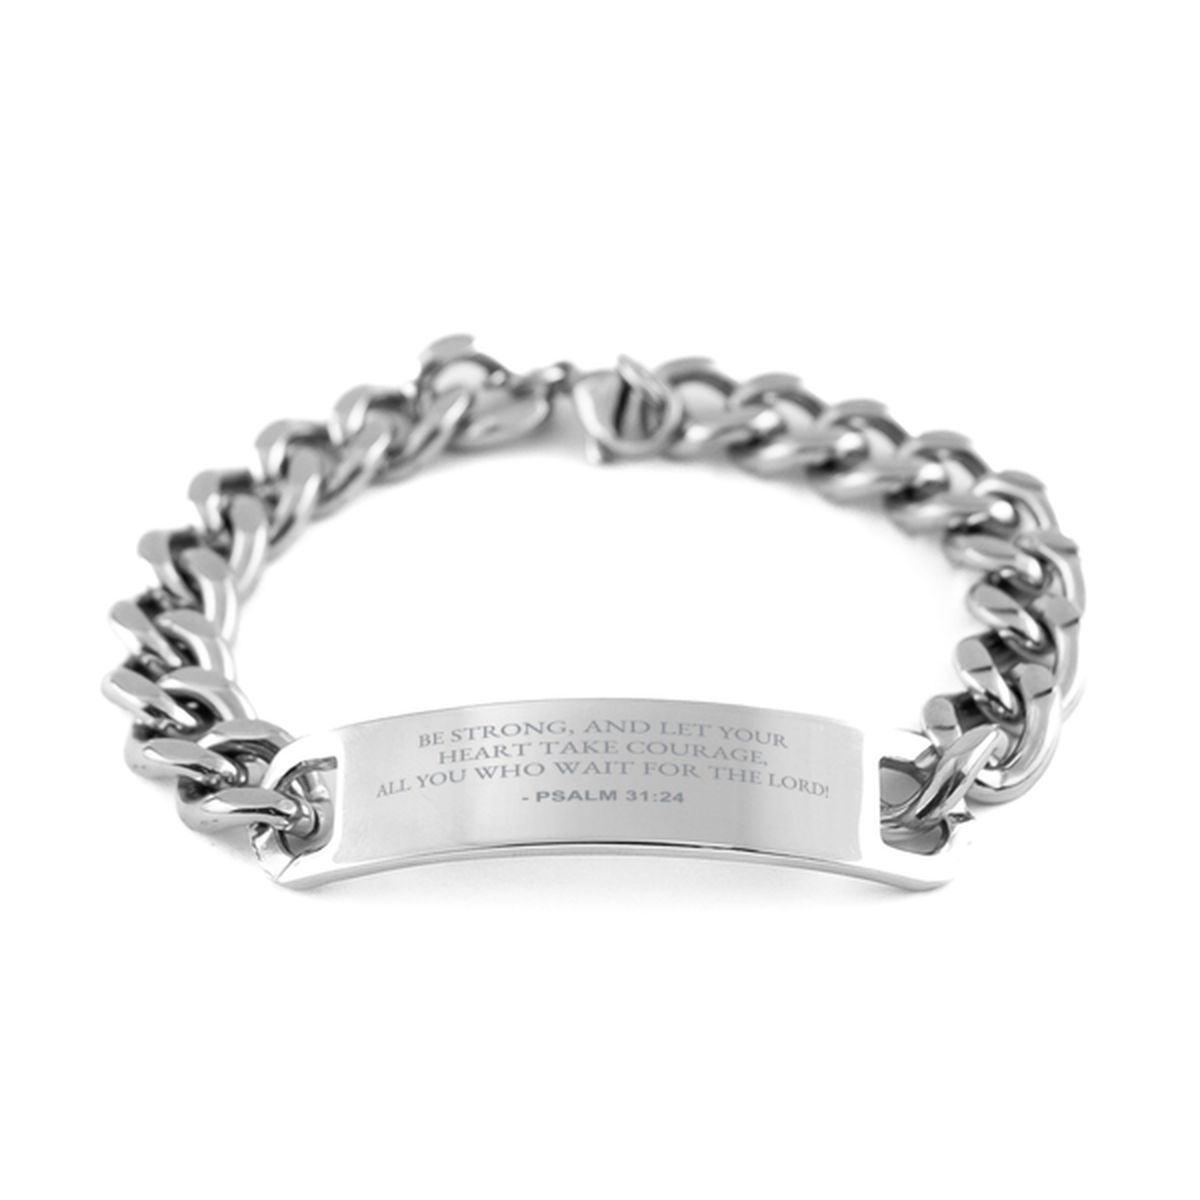 Bible Verse Chain Stainless Steel Bracelet, Psalm 31:24 Be Strong, And Let Your Heart Take Courage, All, Inspirational Christian Gifts For Men Women